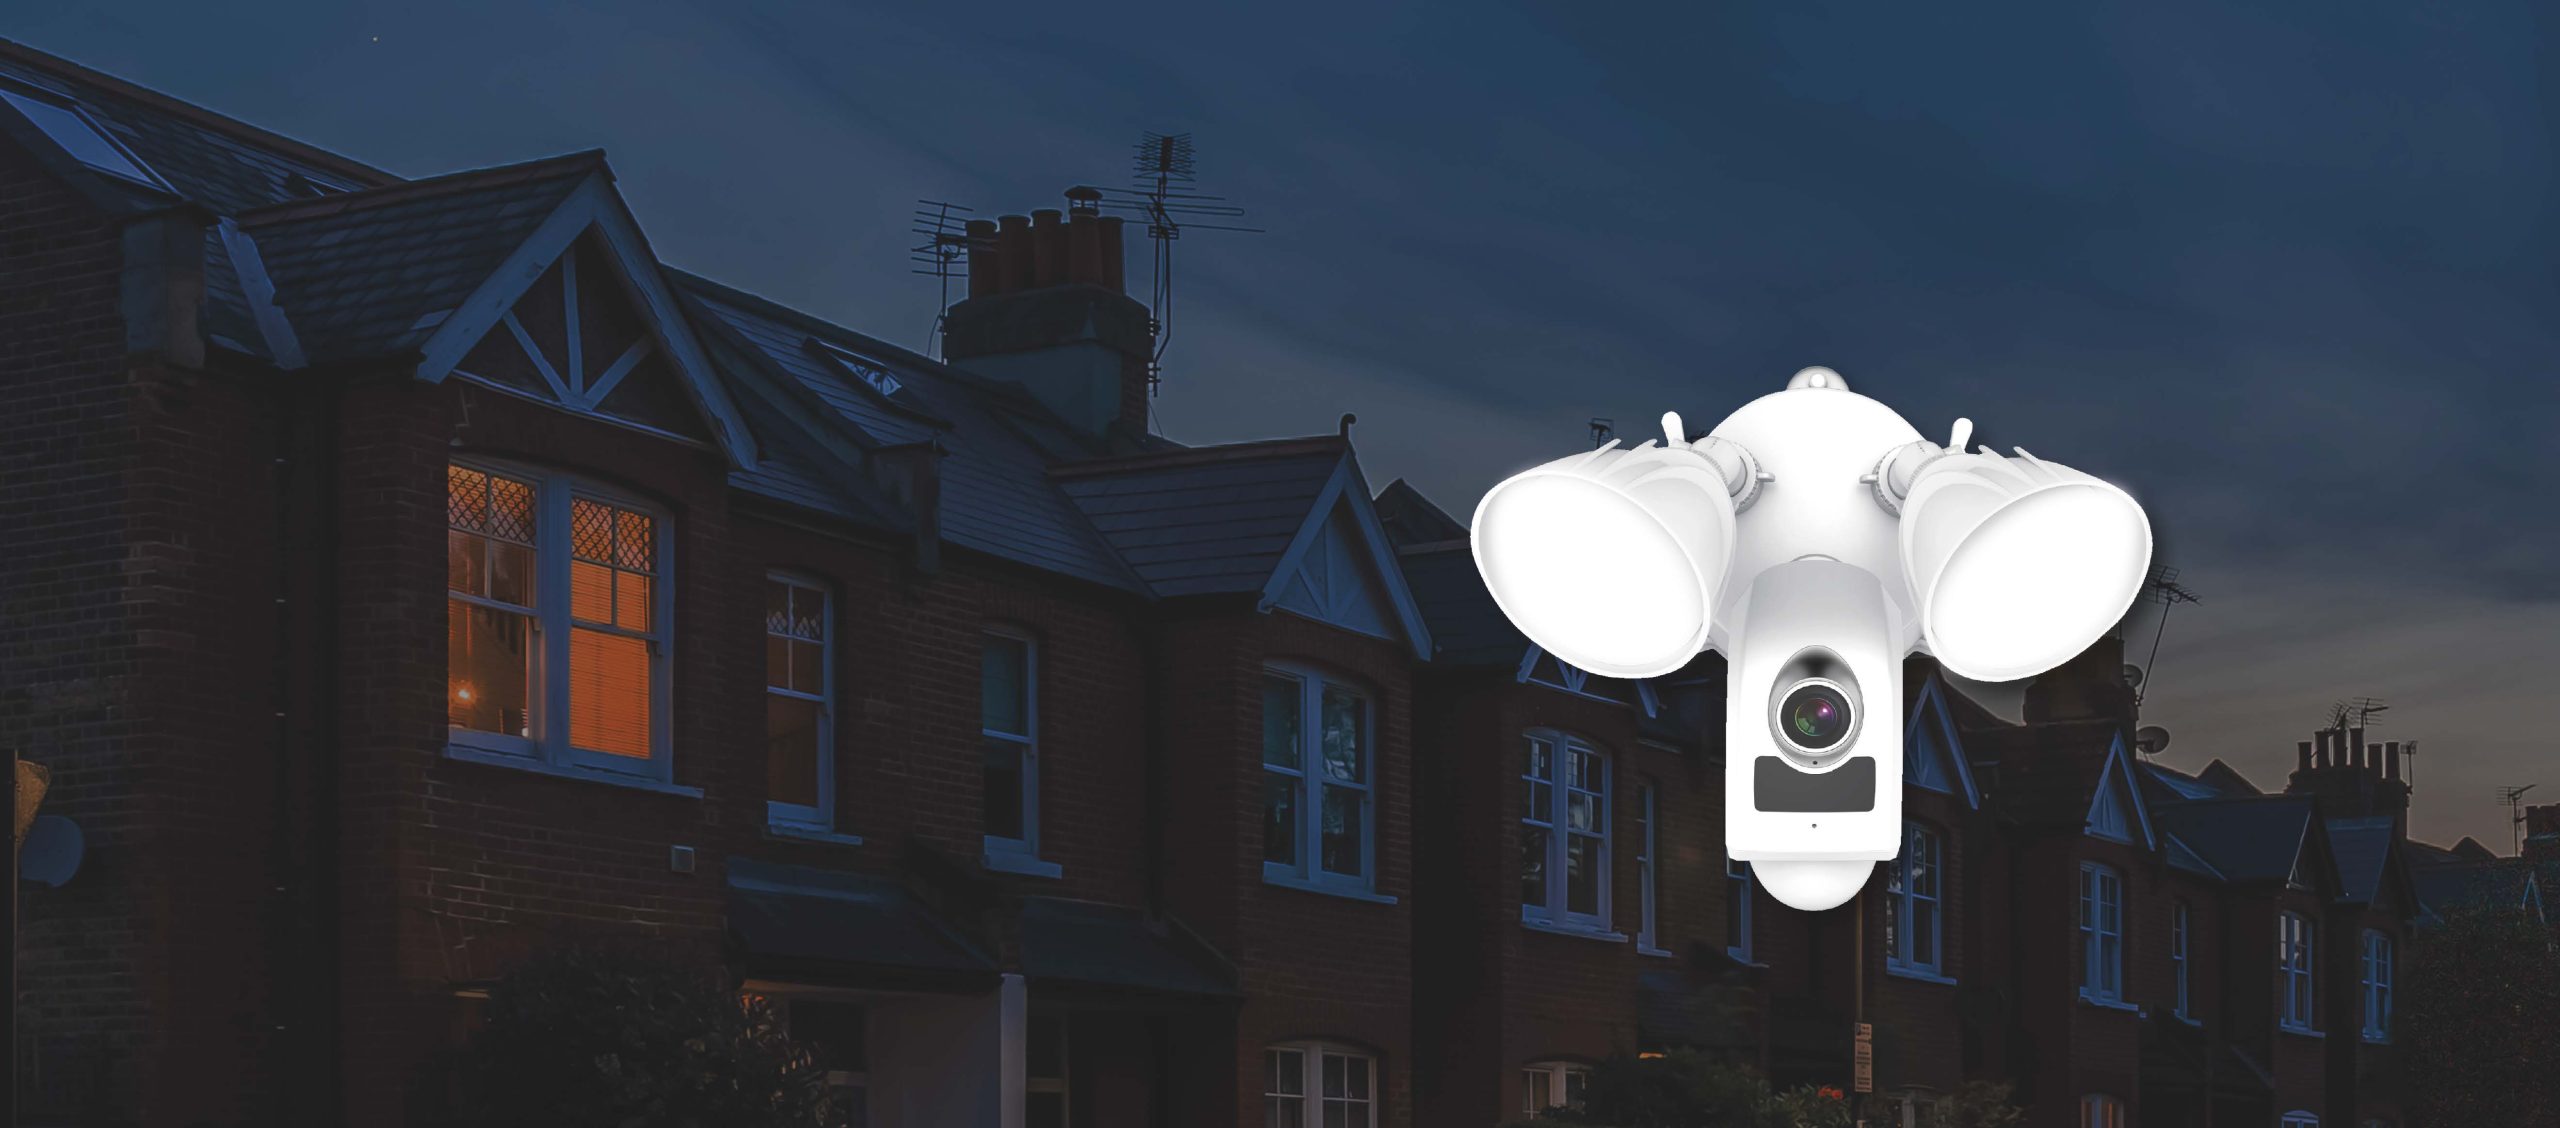 Get perimeter protection for less with our XDL12TT-WE and LightCamera promotions, available now.